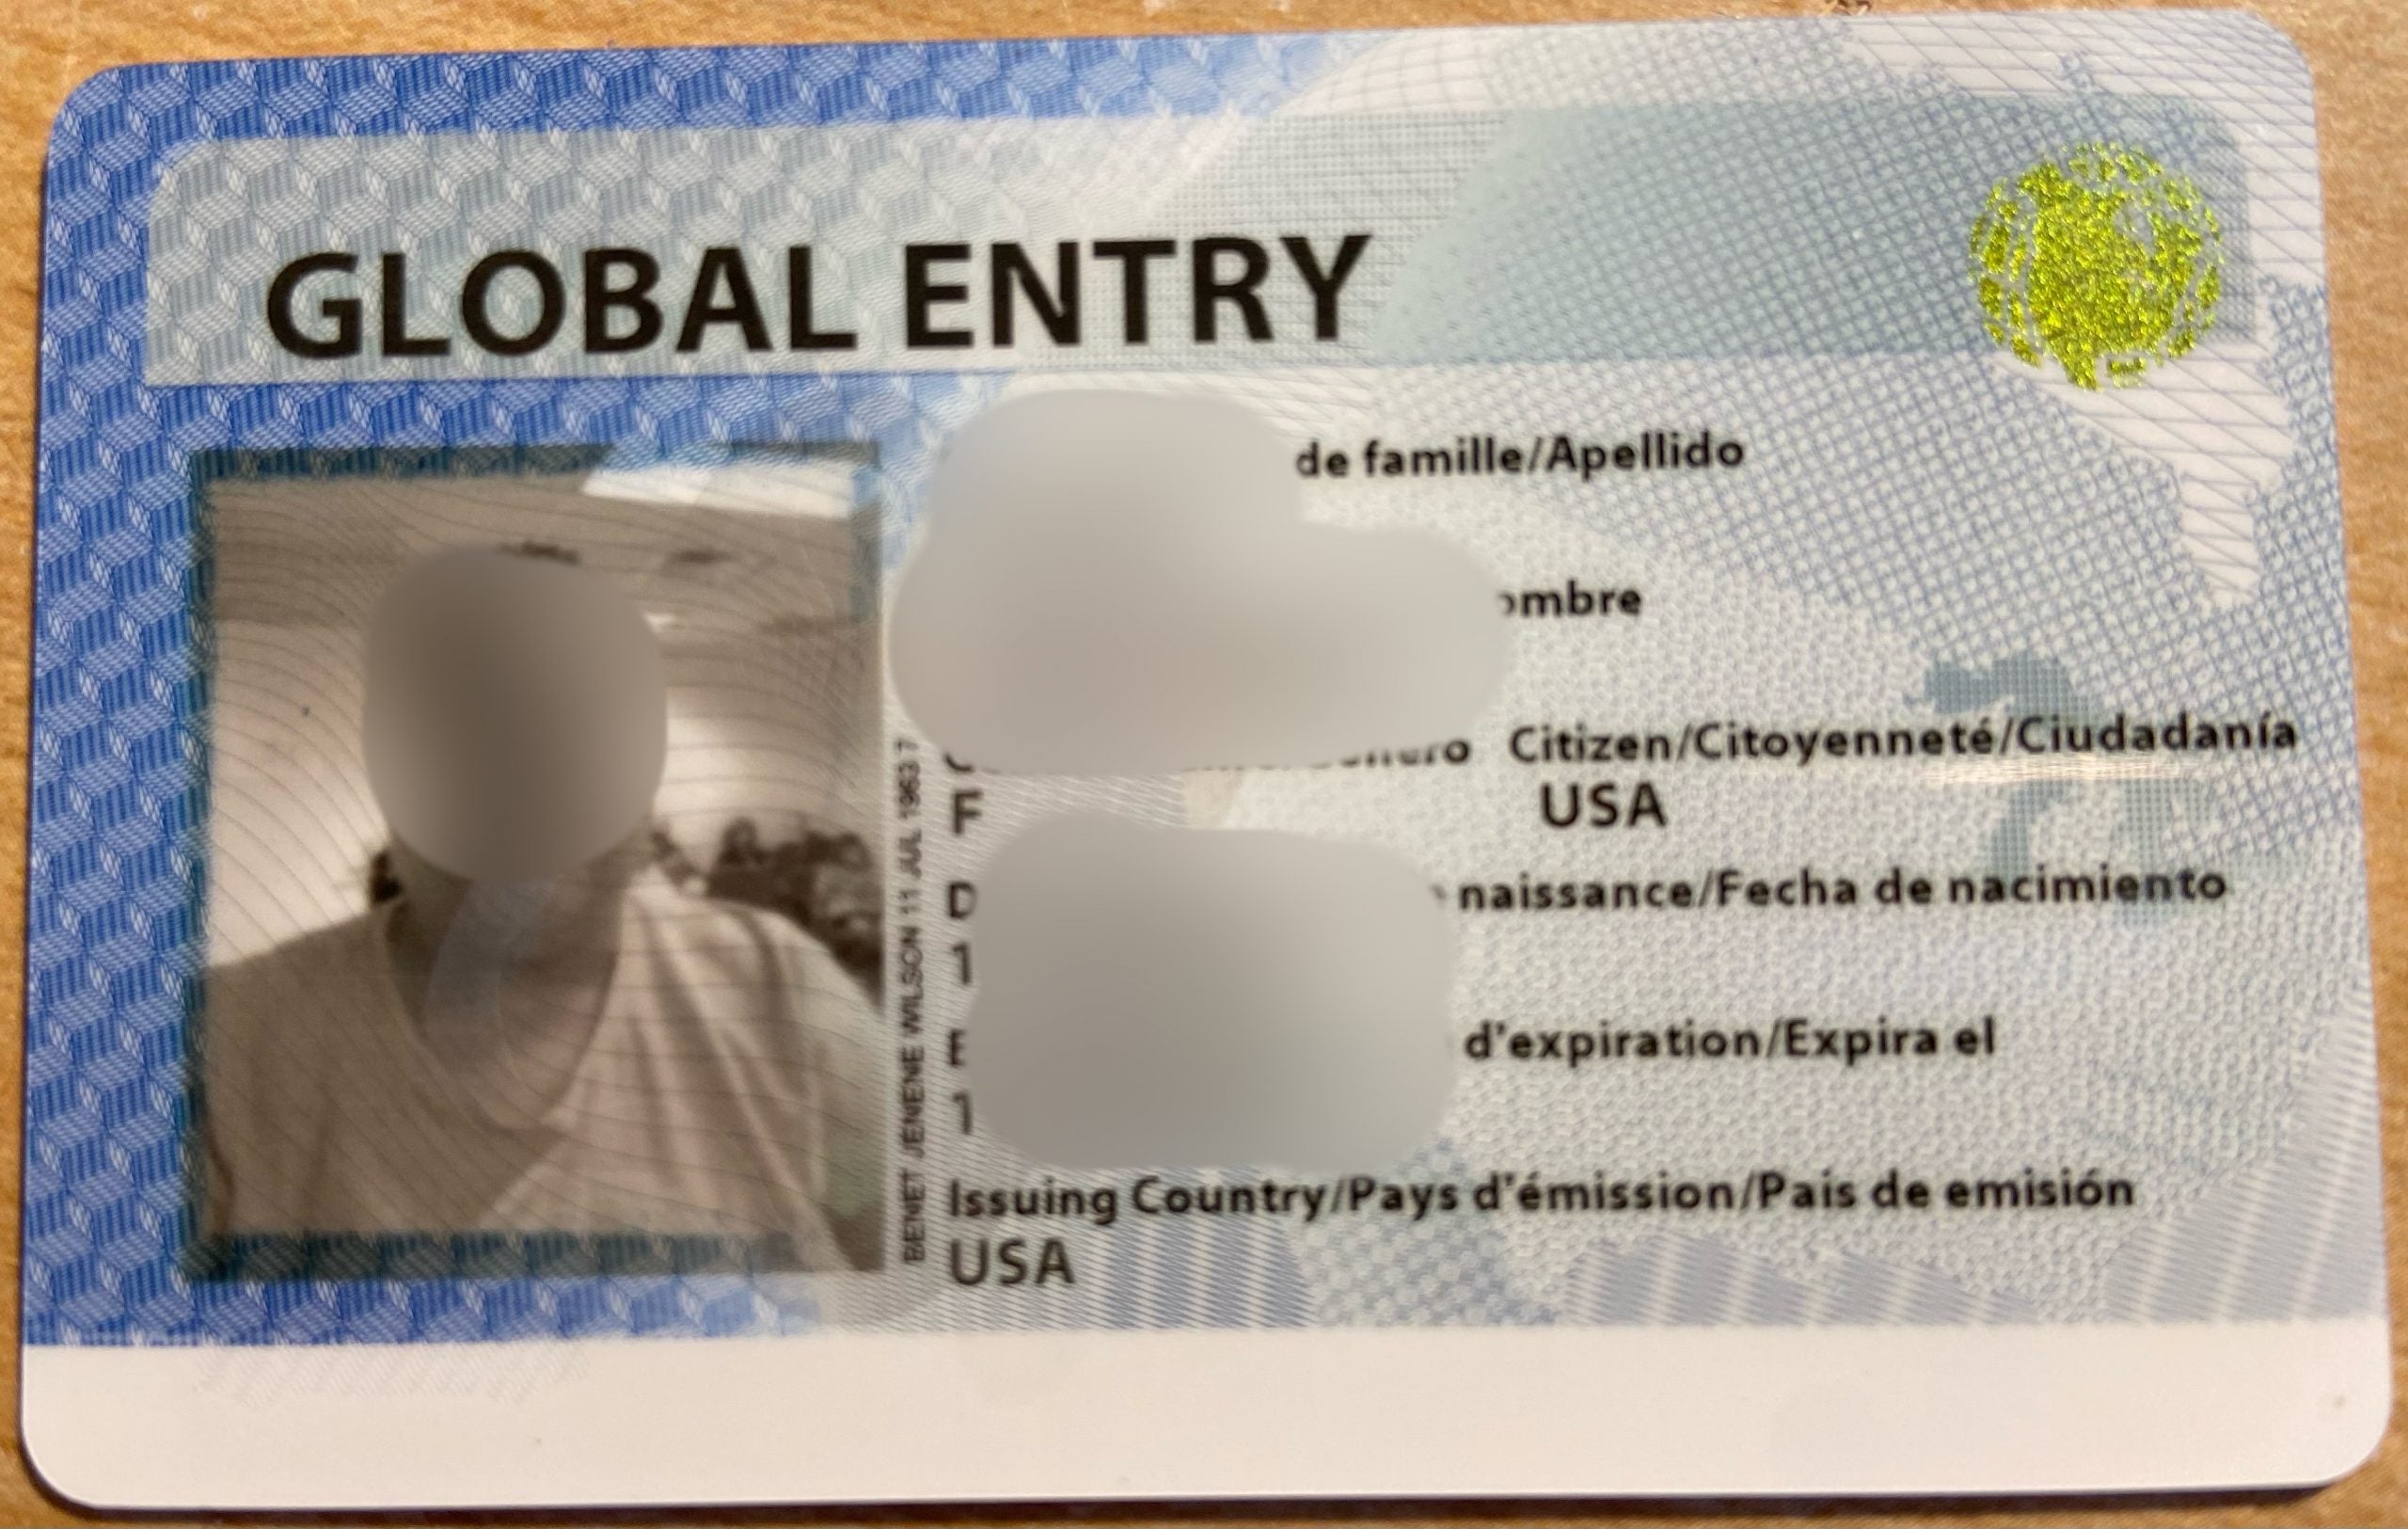 what-is-a-global-entry-card-my-global-entry-card-came-with-a-rfid